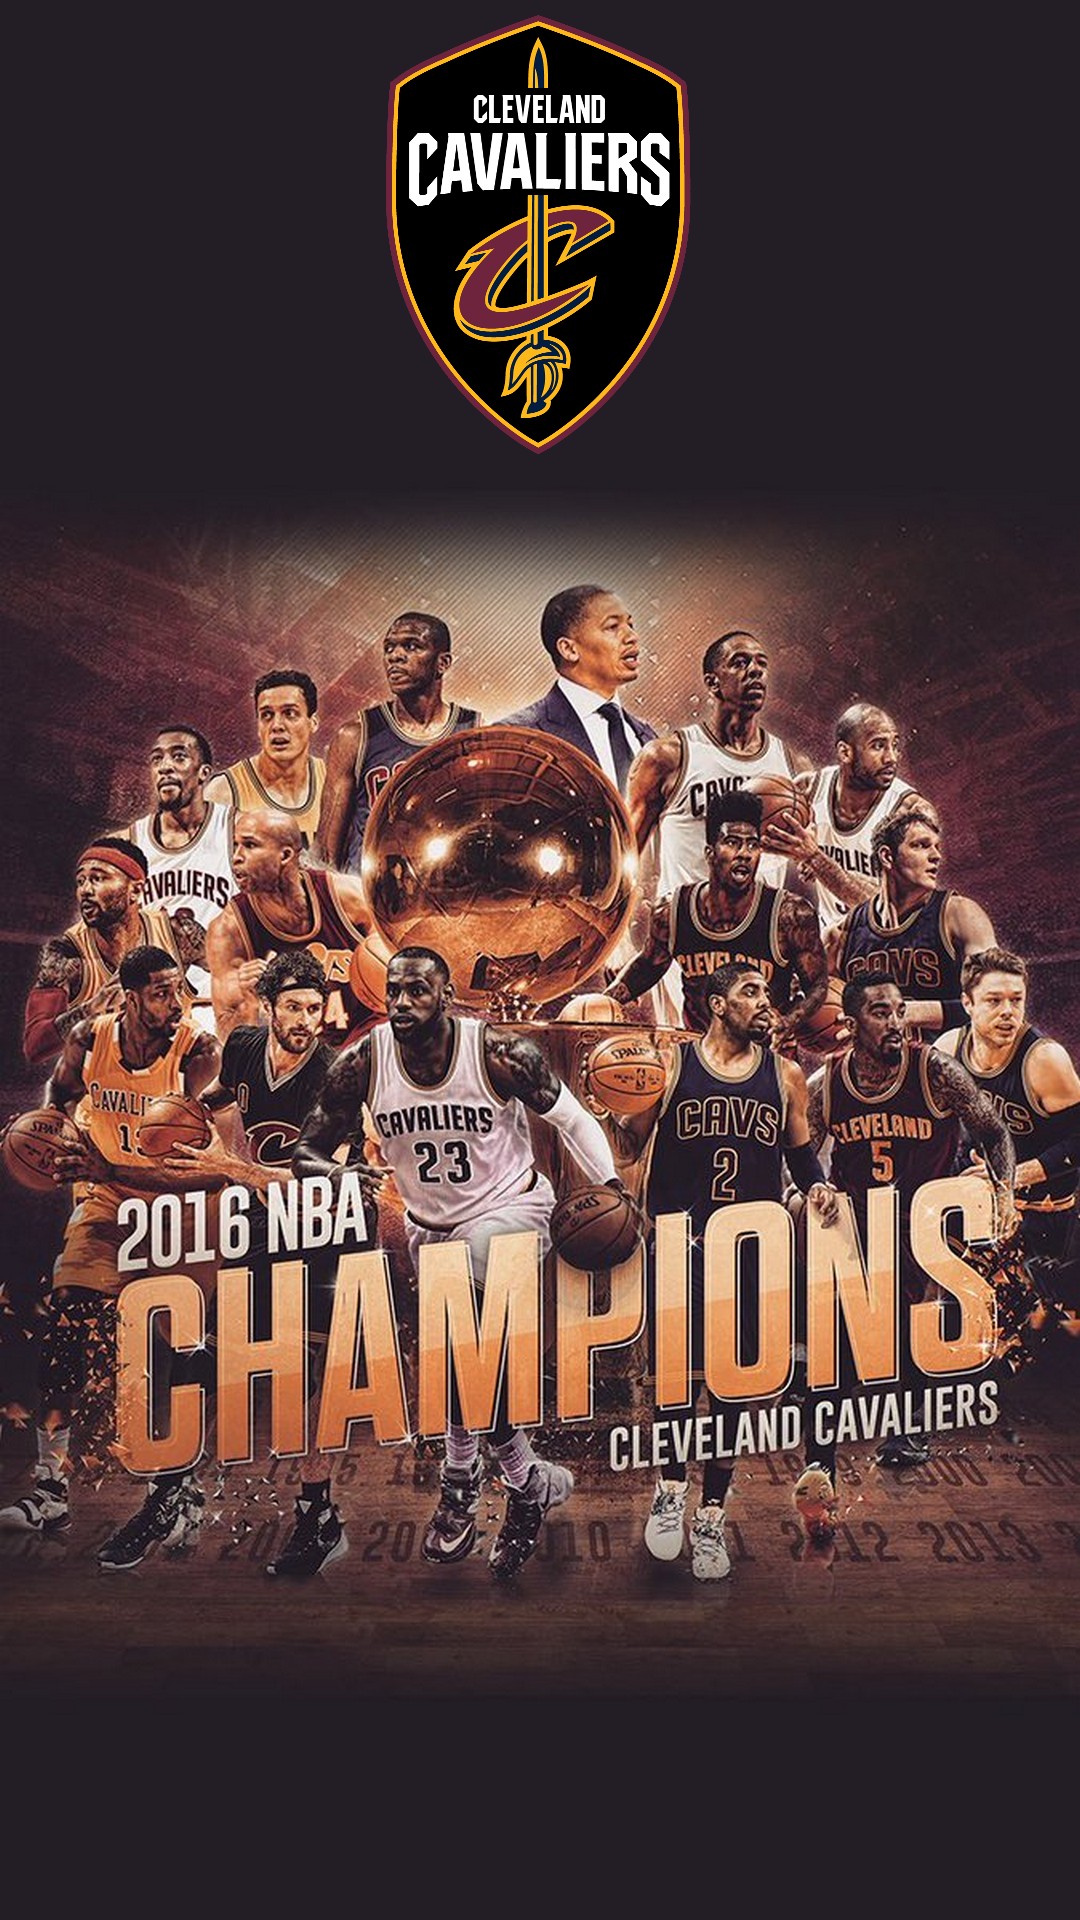 Cleveland Cavaliers NBA Wallpaper Mobile 1080x1920